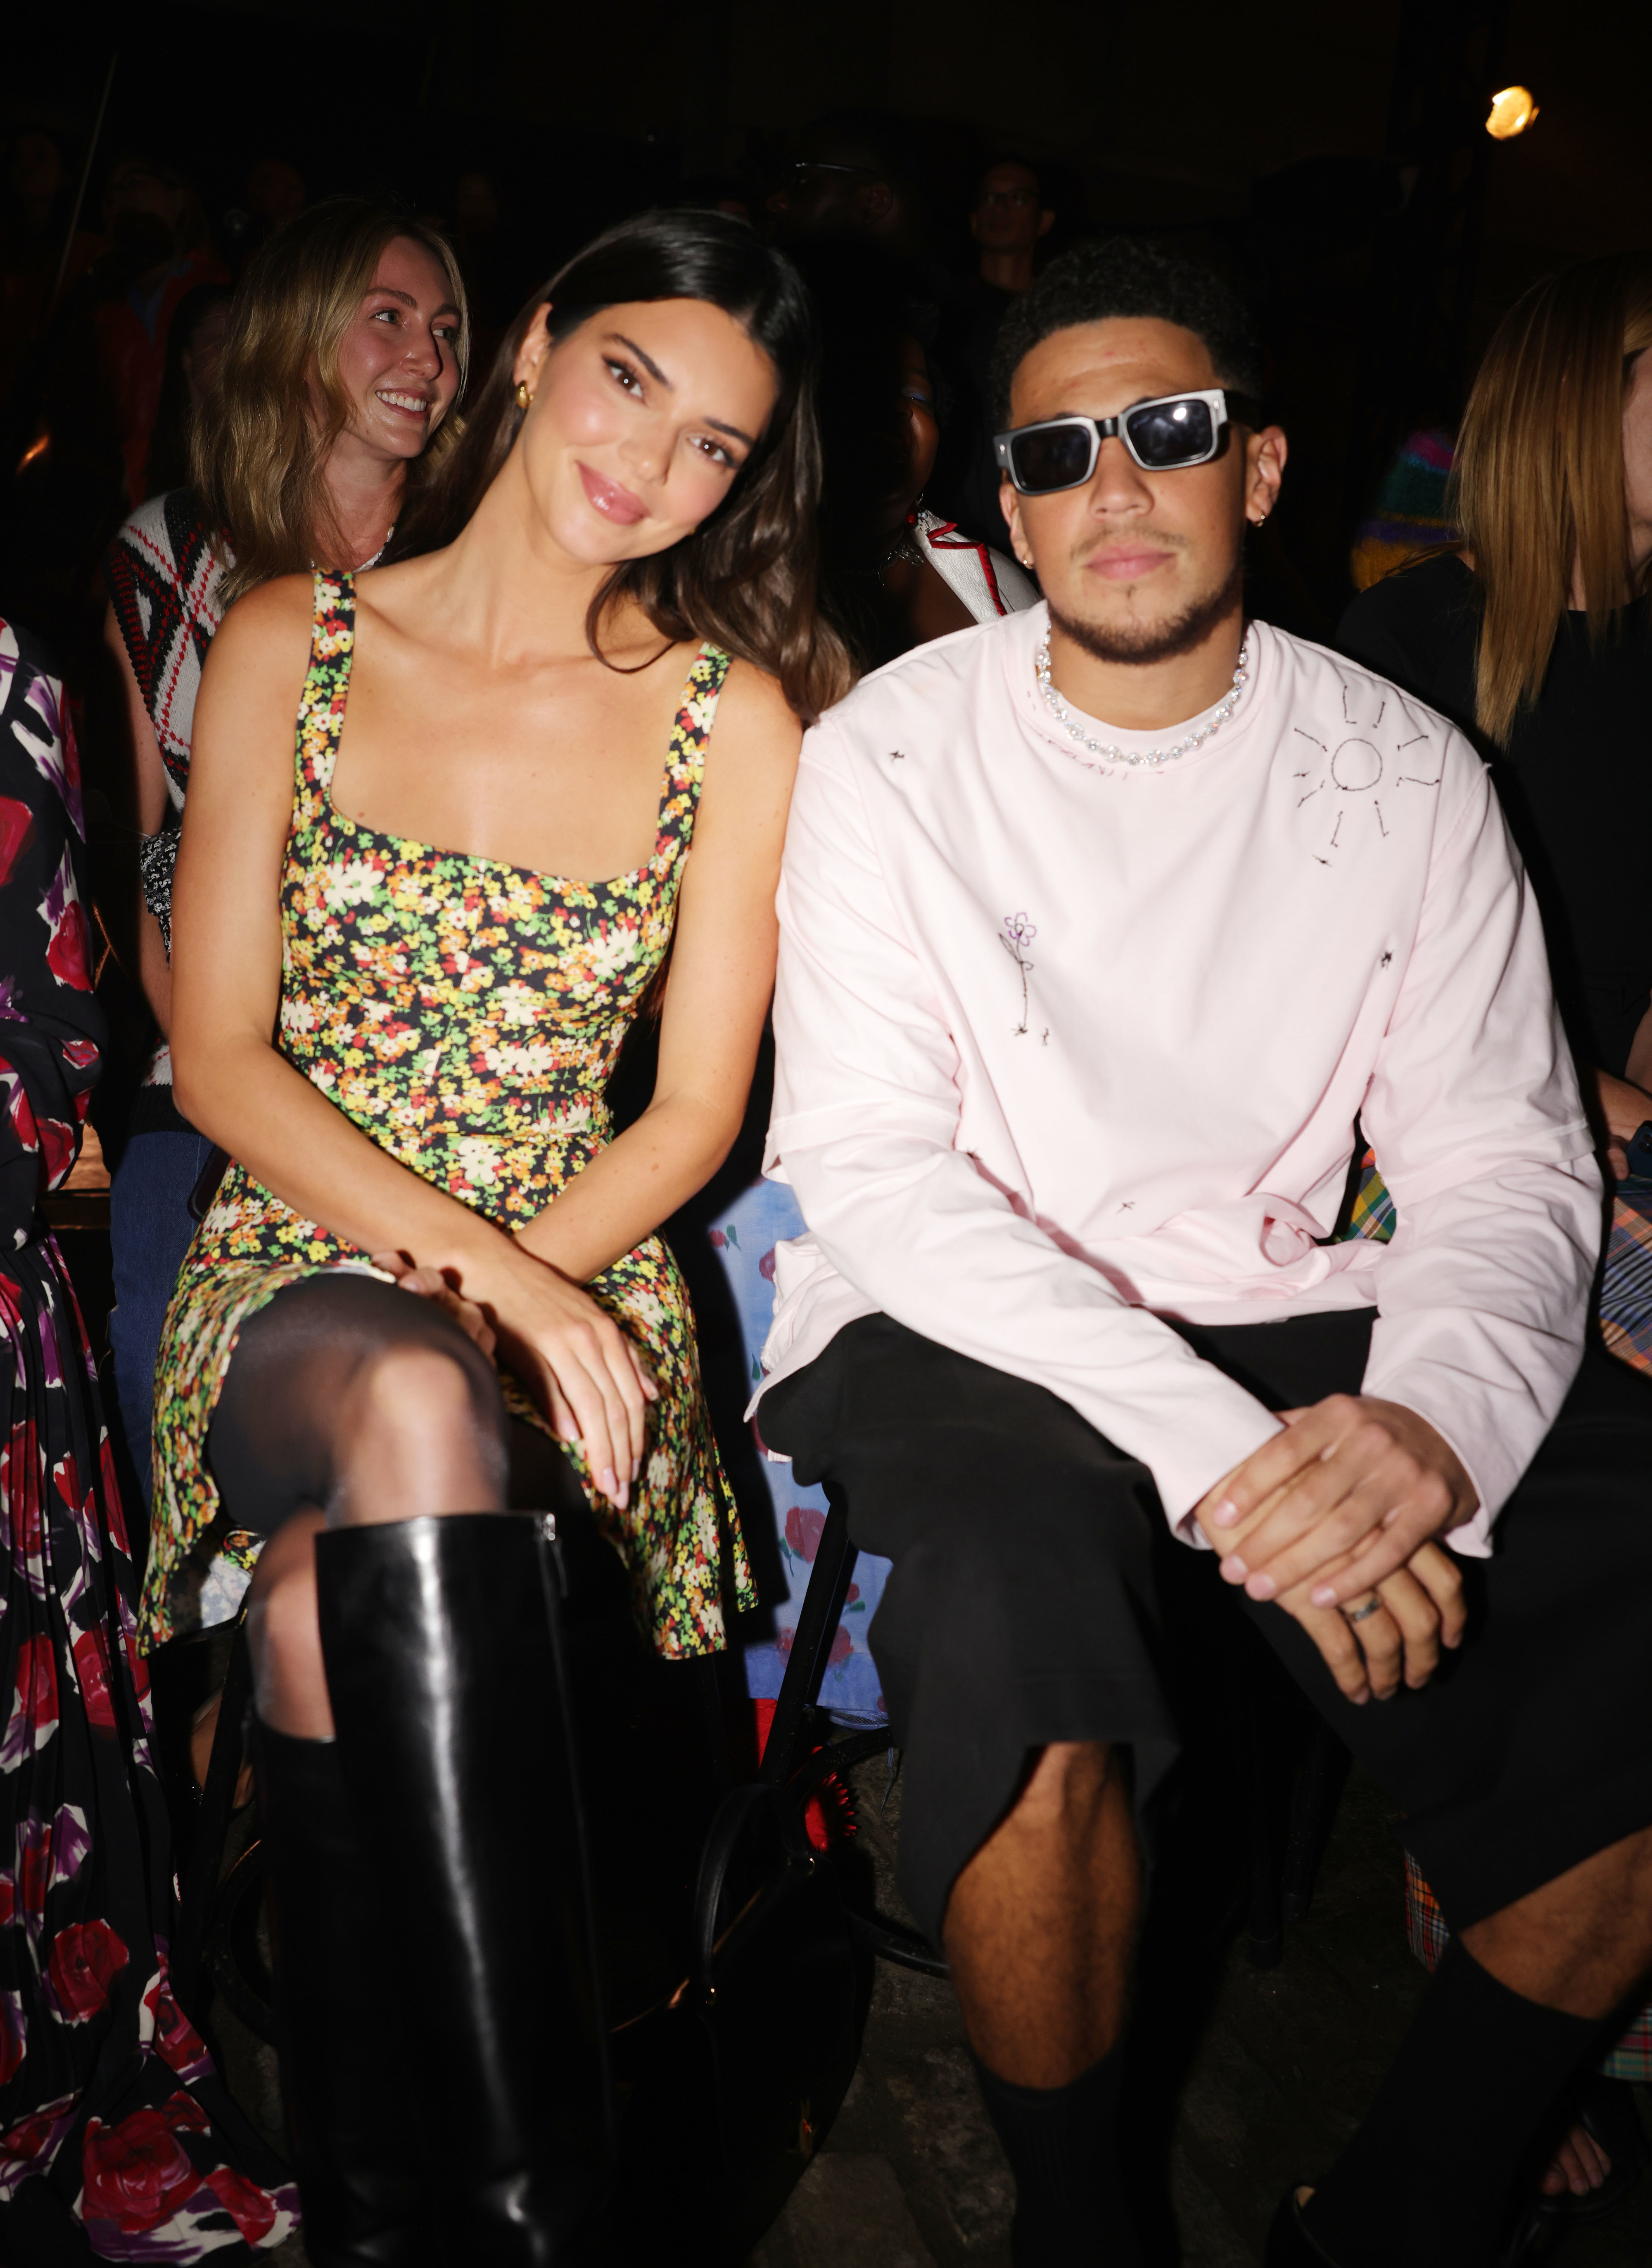 kendall and devon sitting next to each other for an event